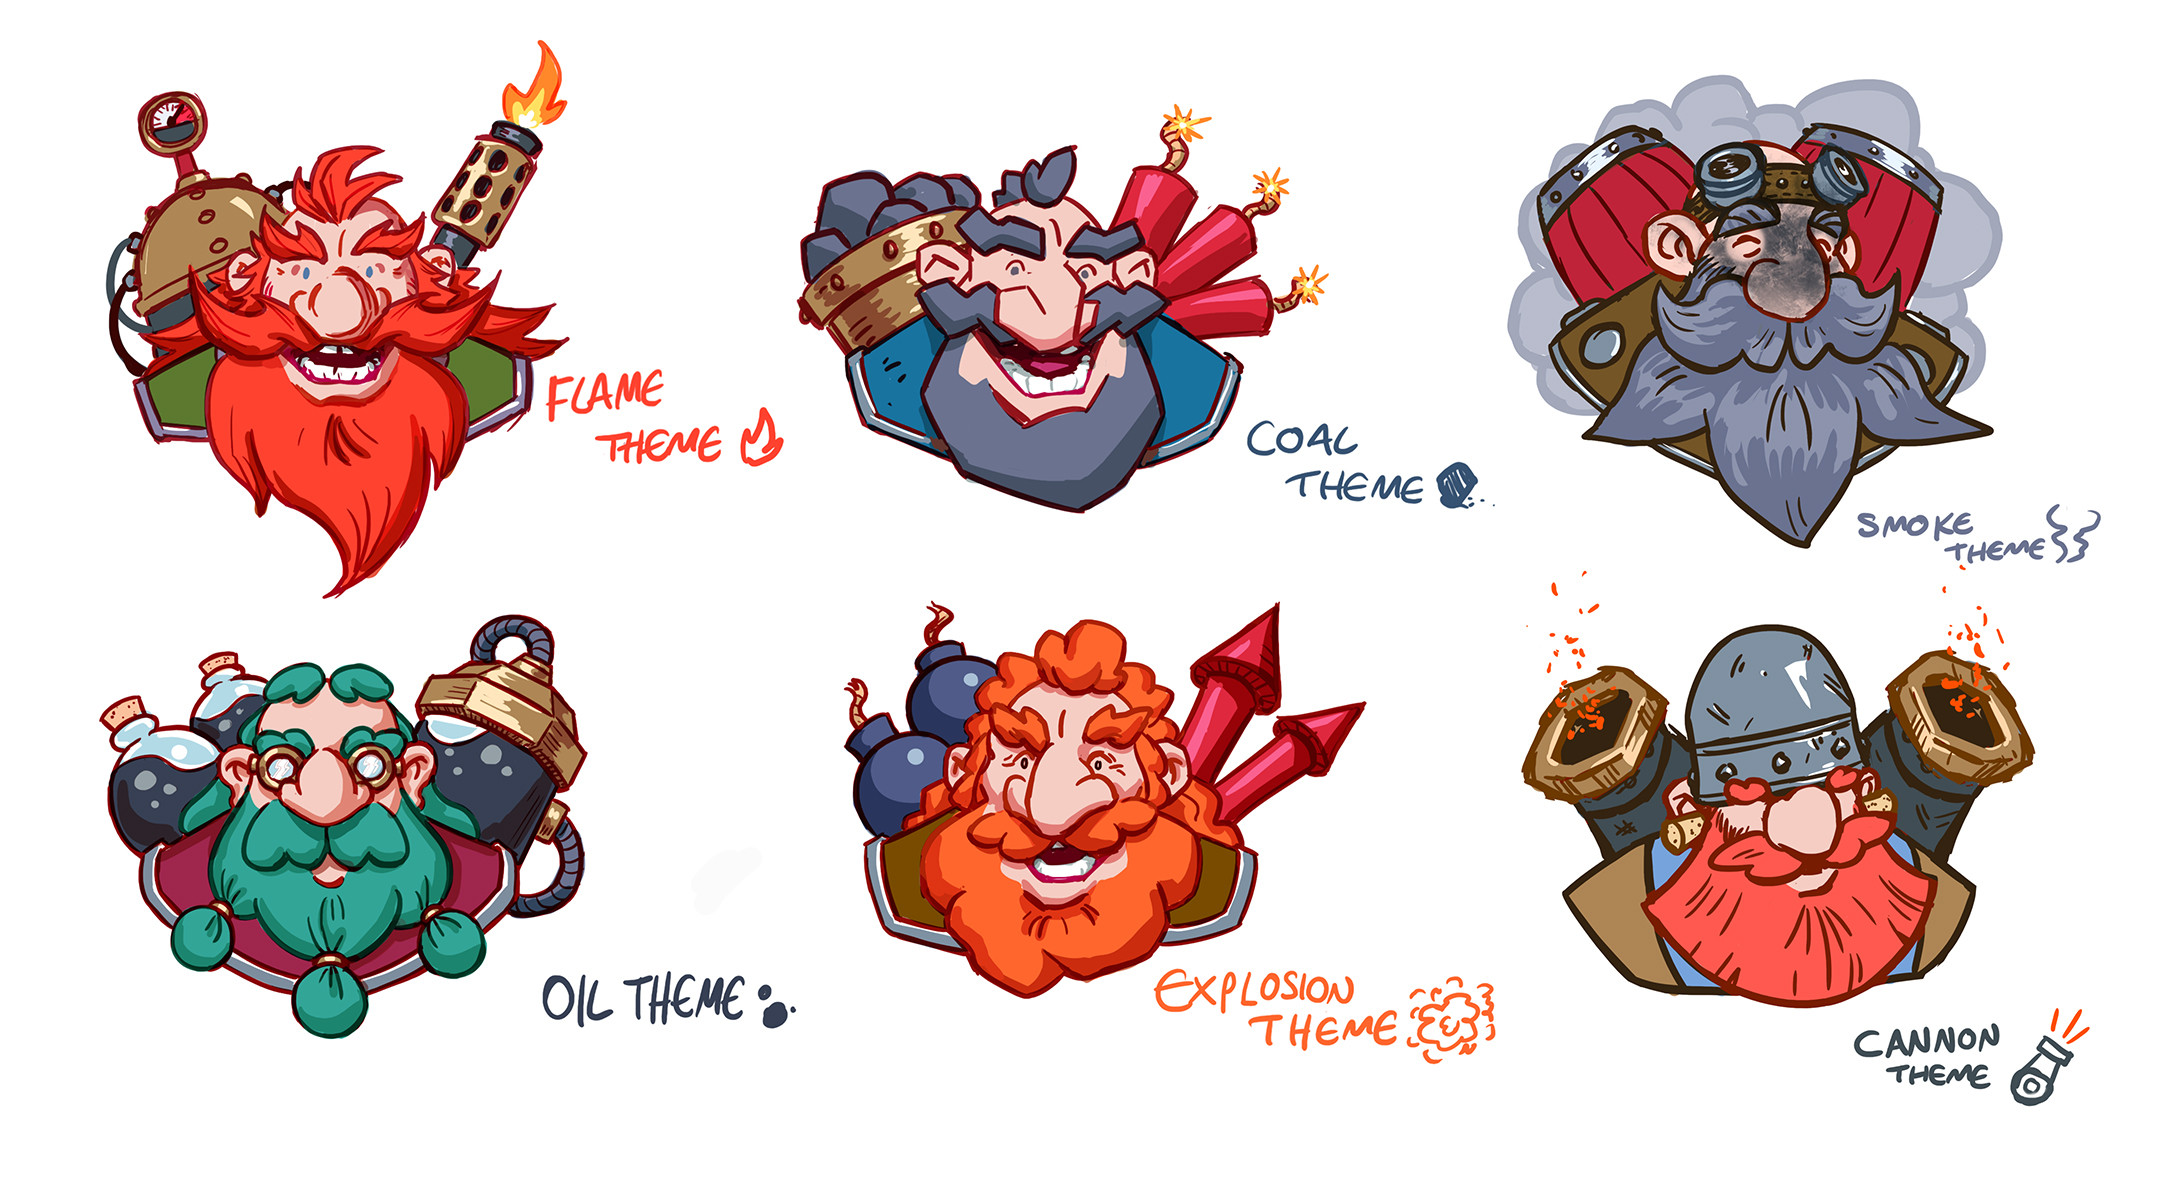 Some early designs for the dwarves, trying to give each a different theme.